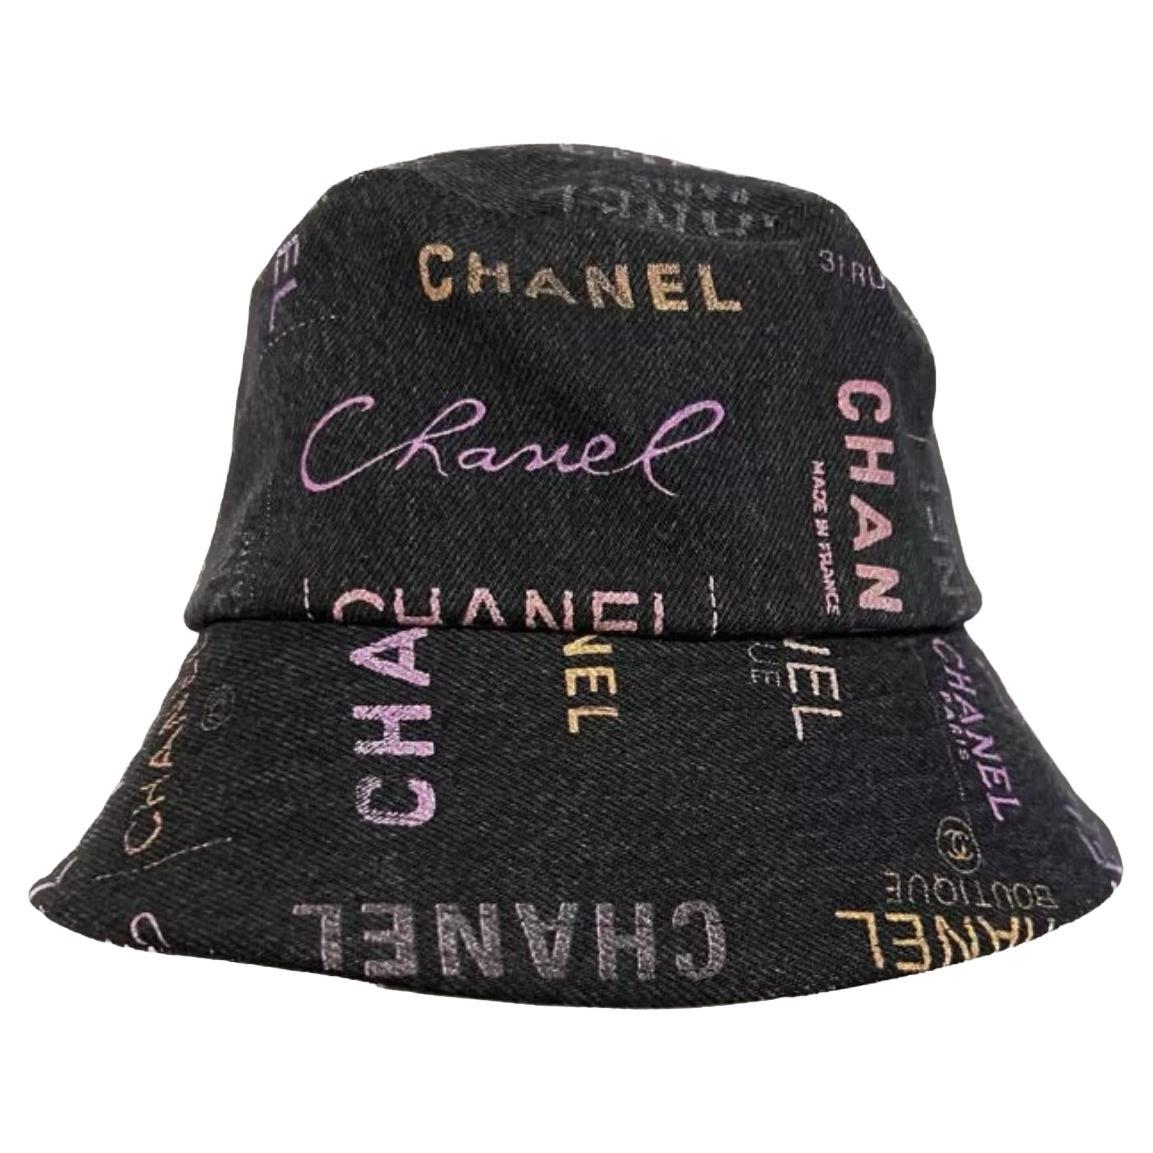 Chanel Bucket Hat - 9 For Sale on 1stDibs